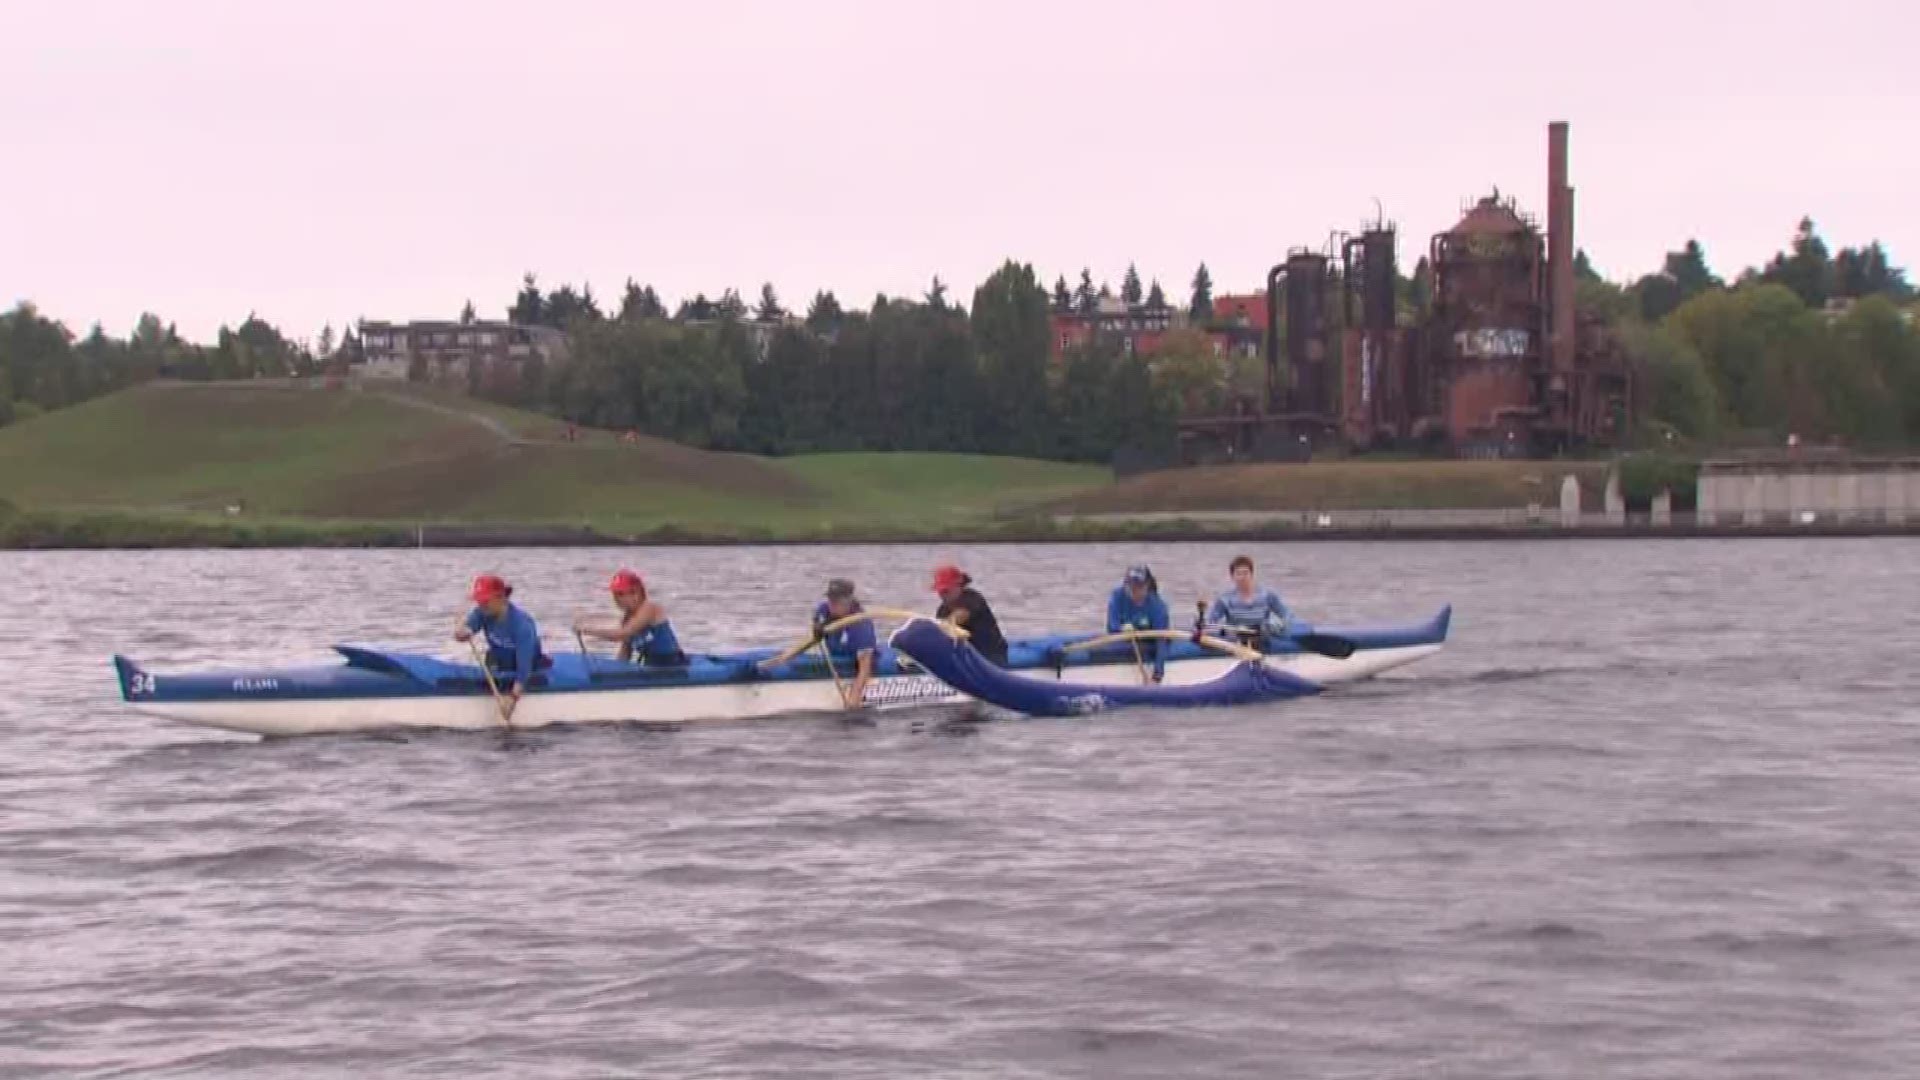 The Women of Washington paddling team will compete in a prestigious Hawaiian race on September 22. KING 5's Kalie Greenberg reports.